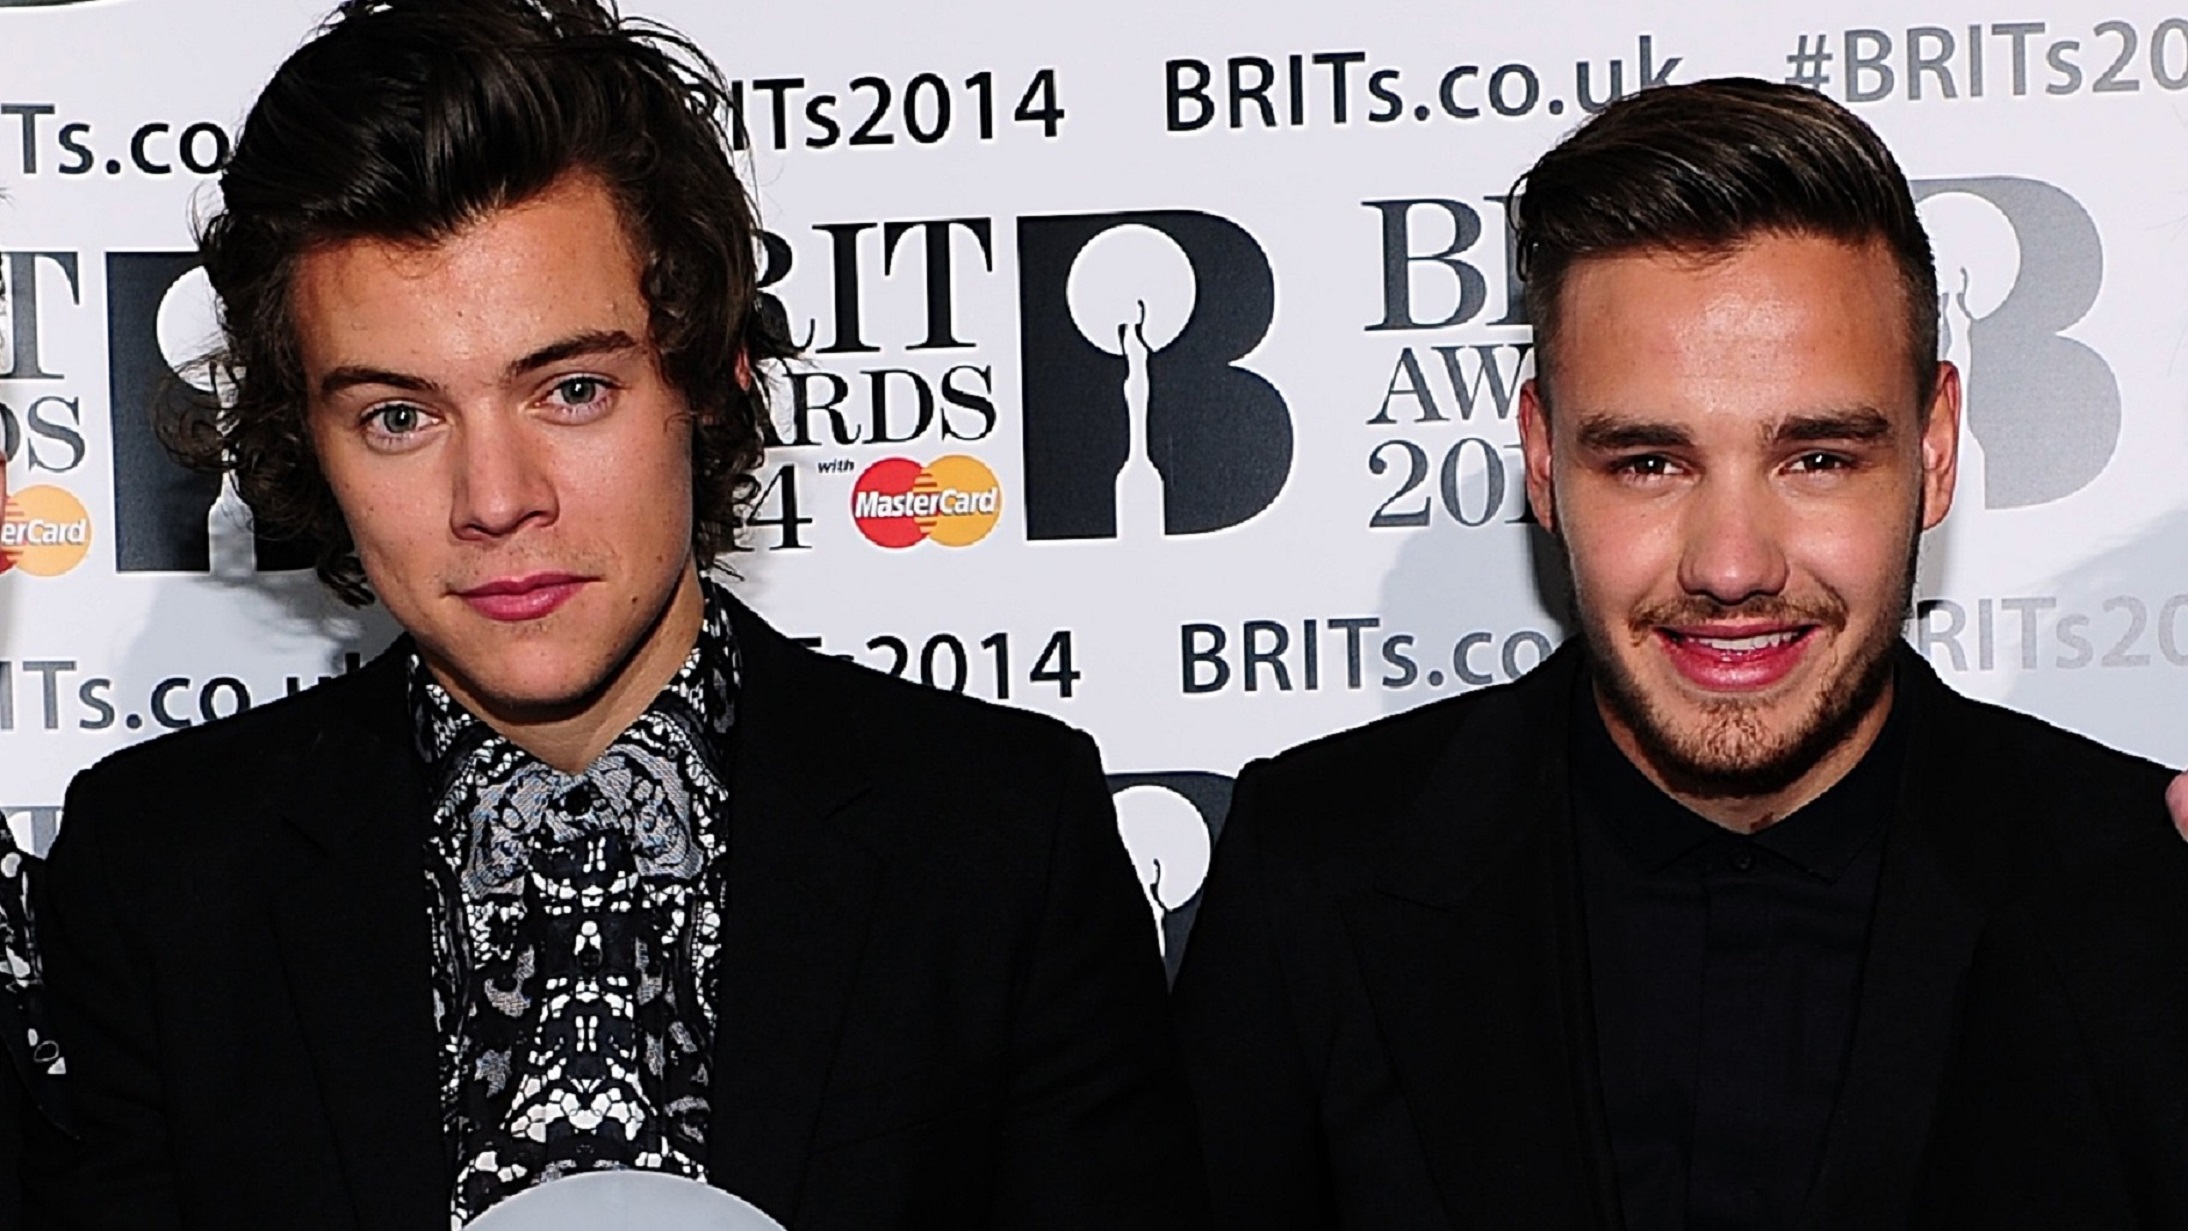 Liam Payne sends condolences to Harry Styles after death of his stepfather